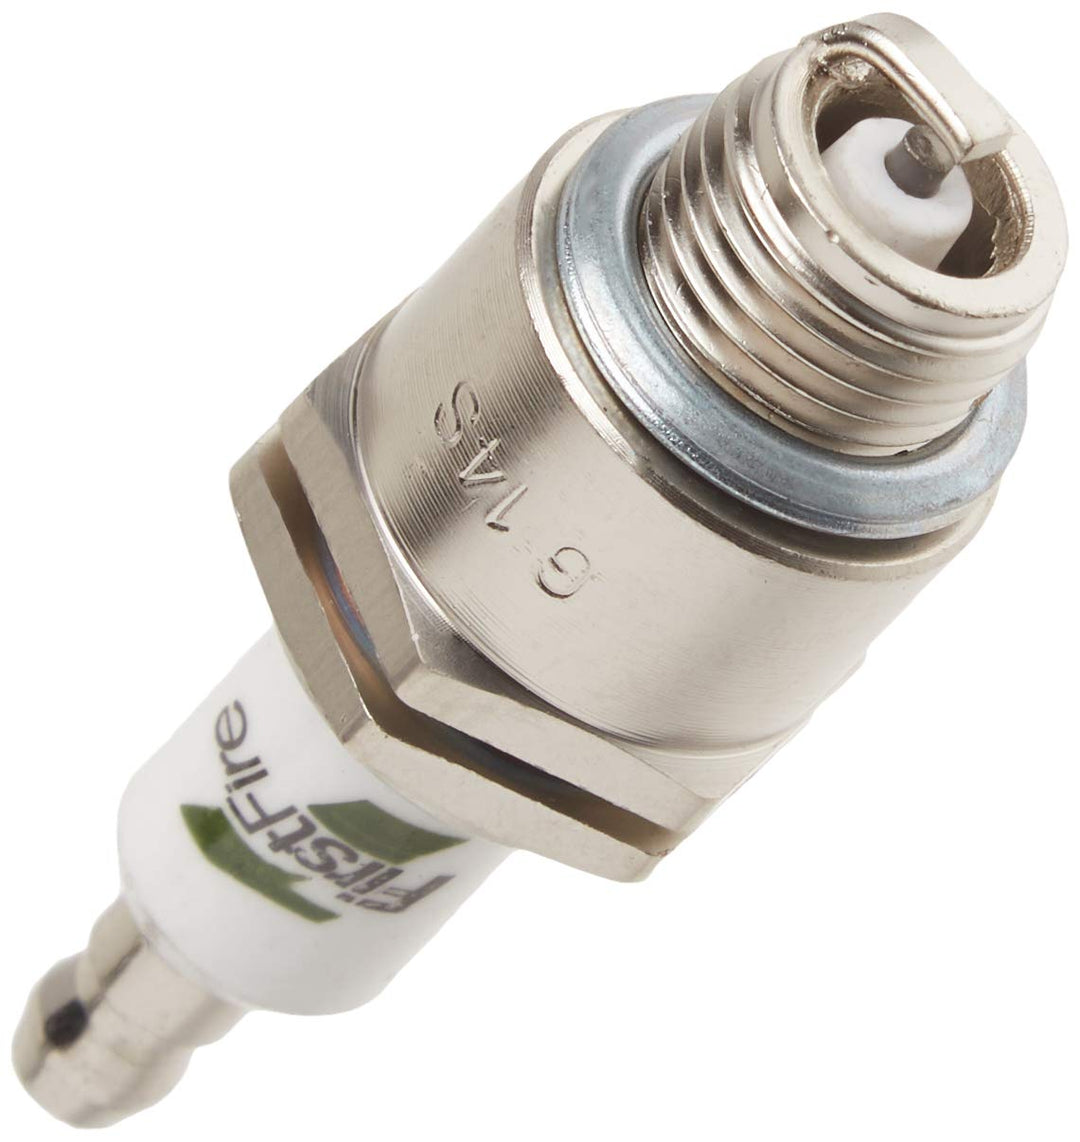 Arnold Corporation FF-10 First Fire Replacement Spark Plug